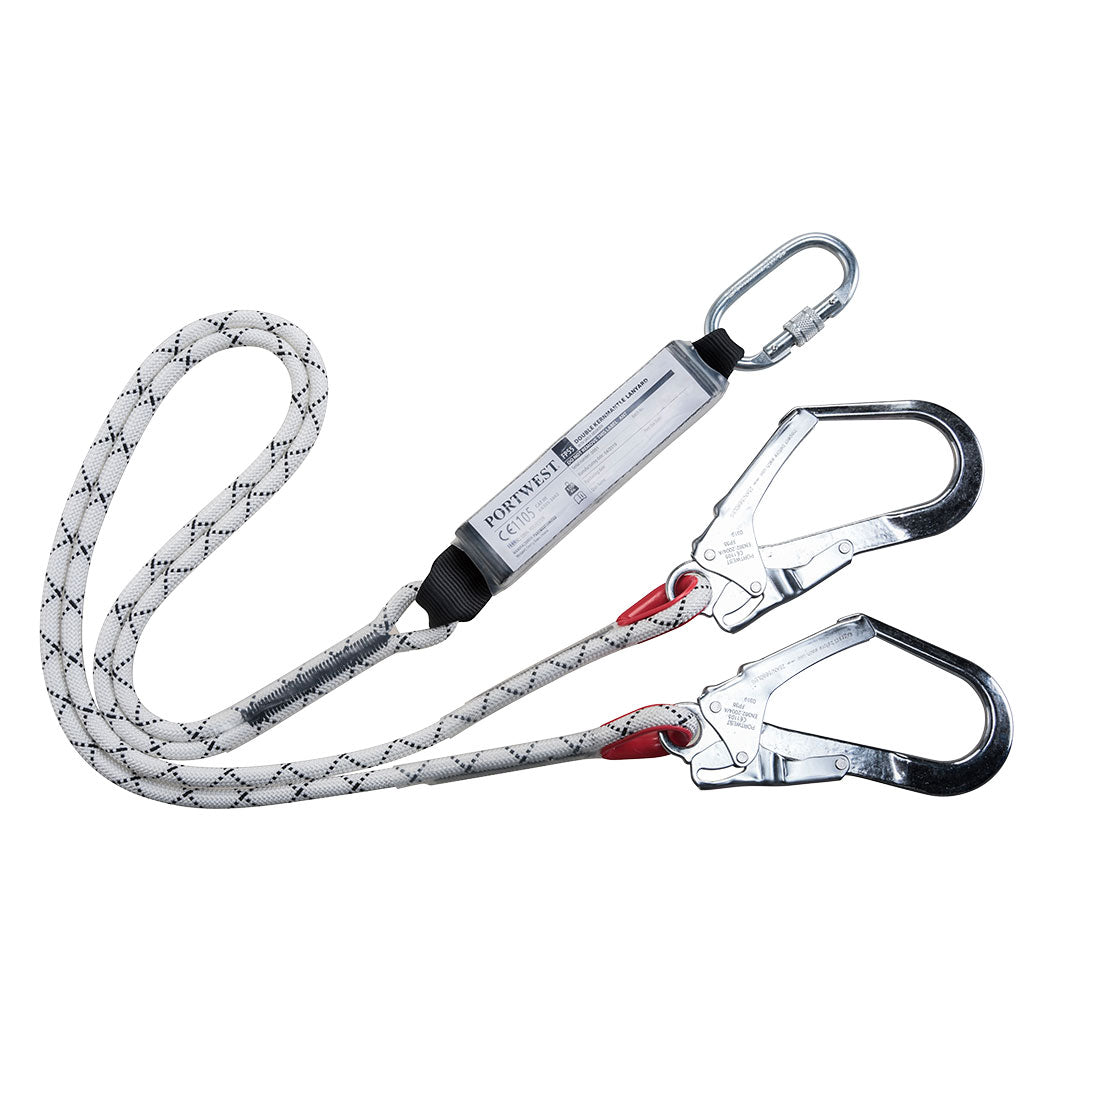 Portwest Double Kernmantle 1.8m Lanyard With Shock Absorber